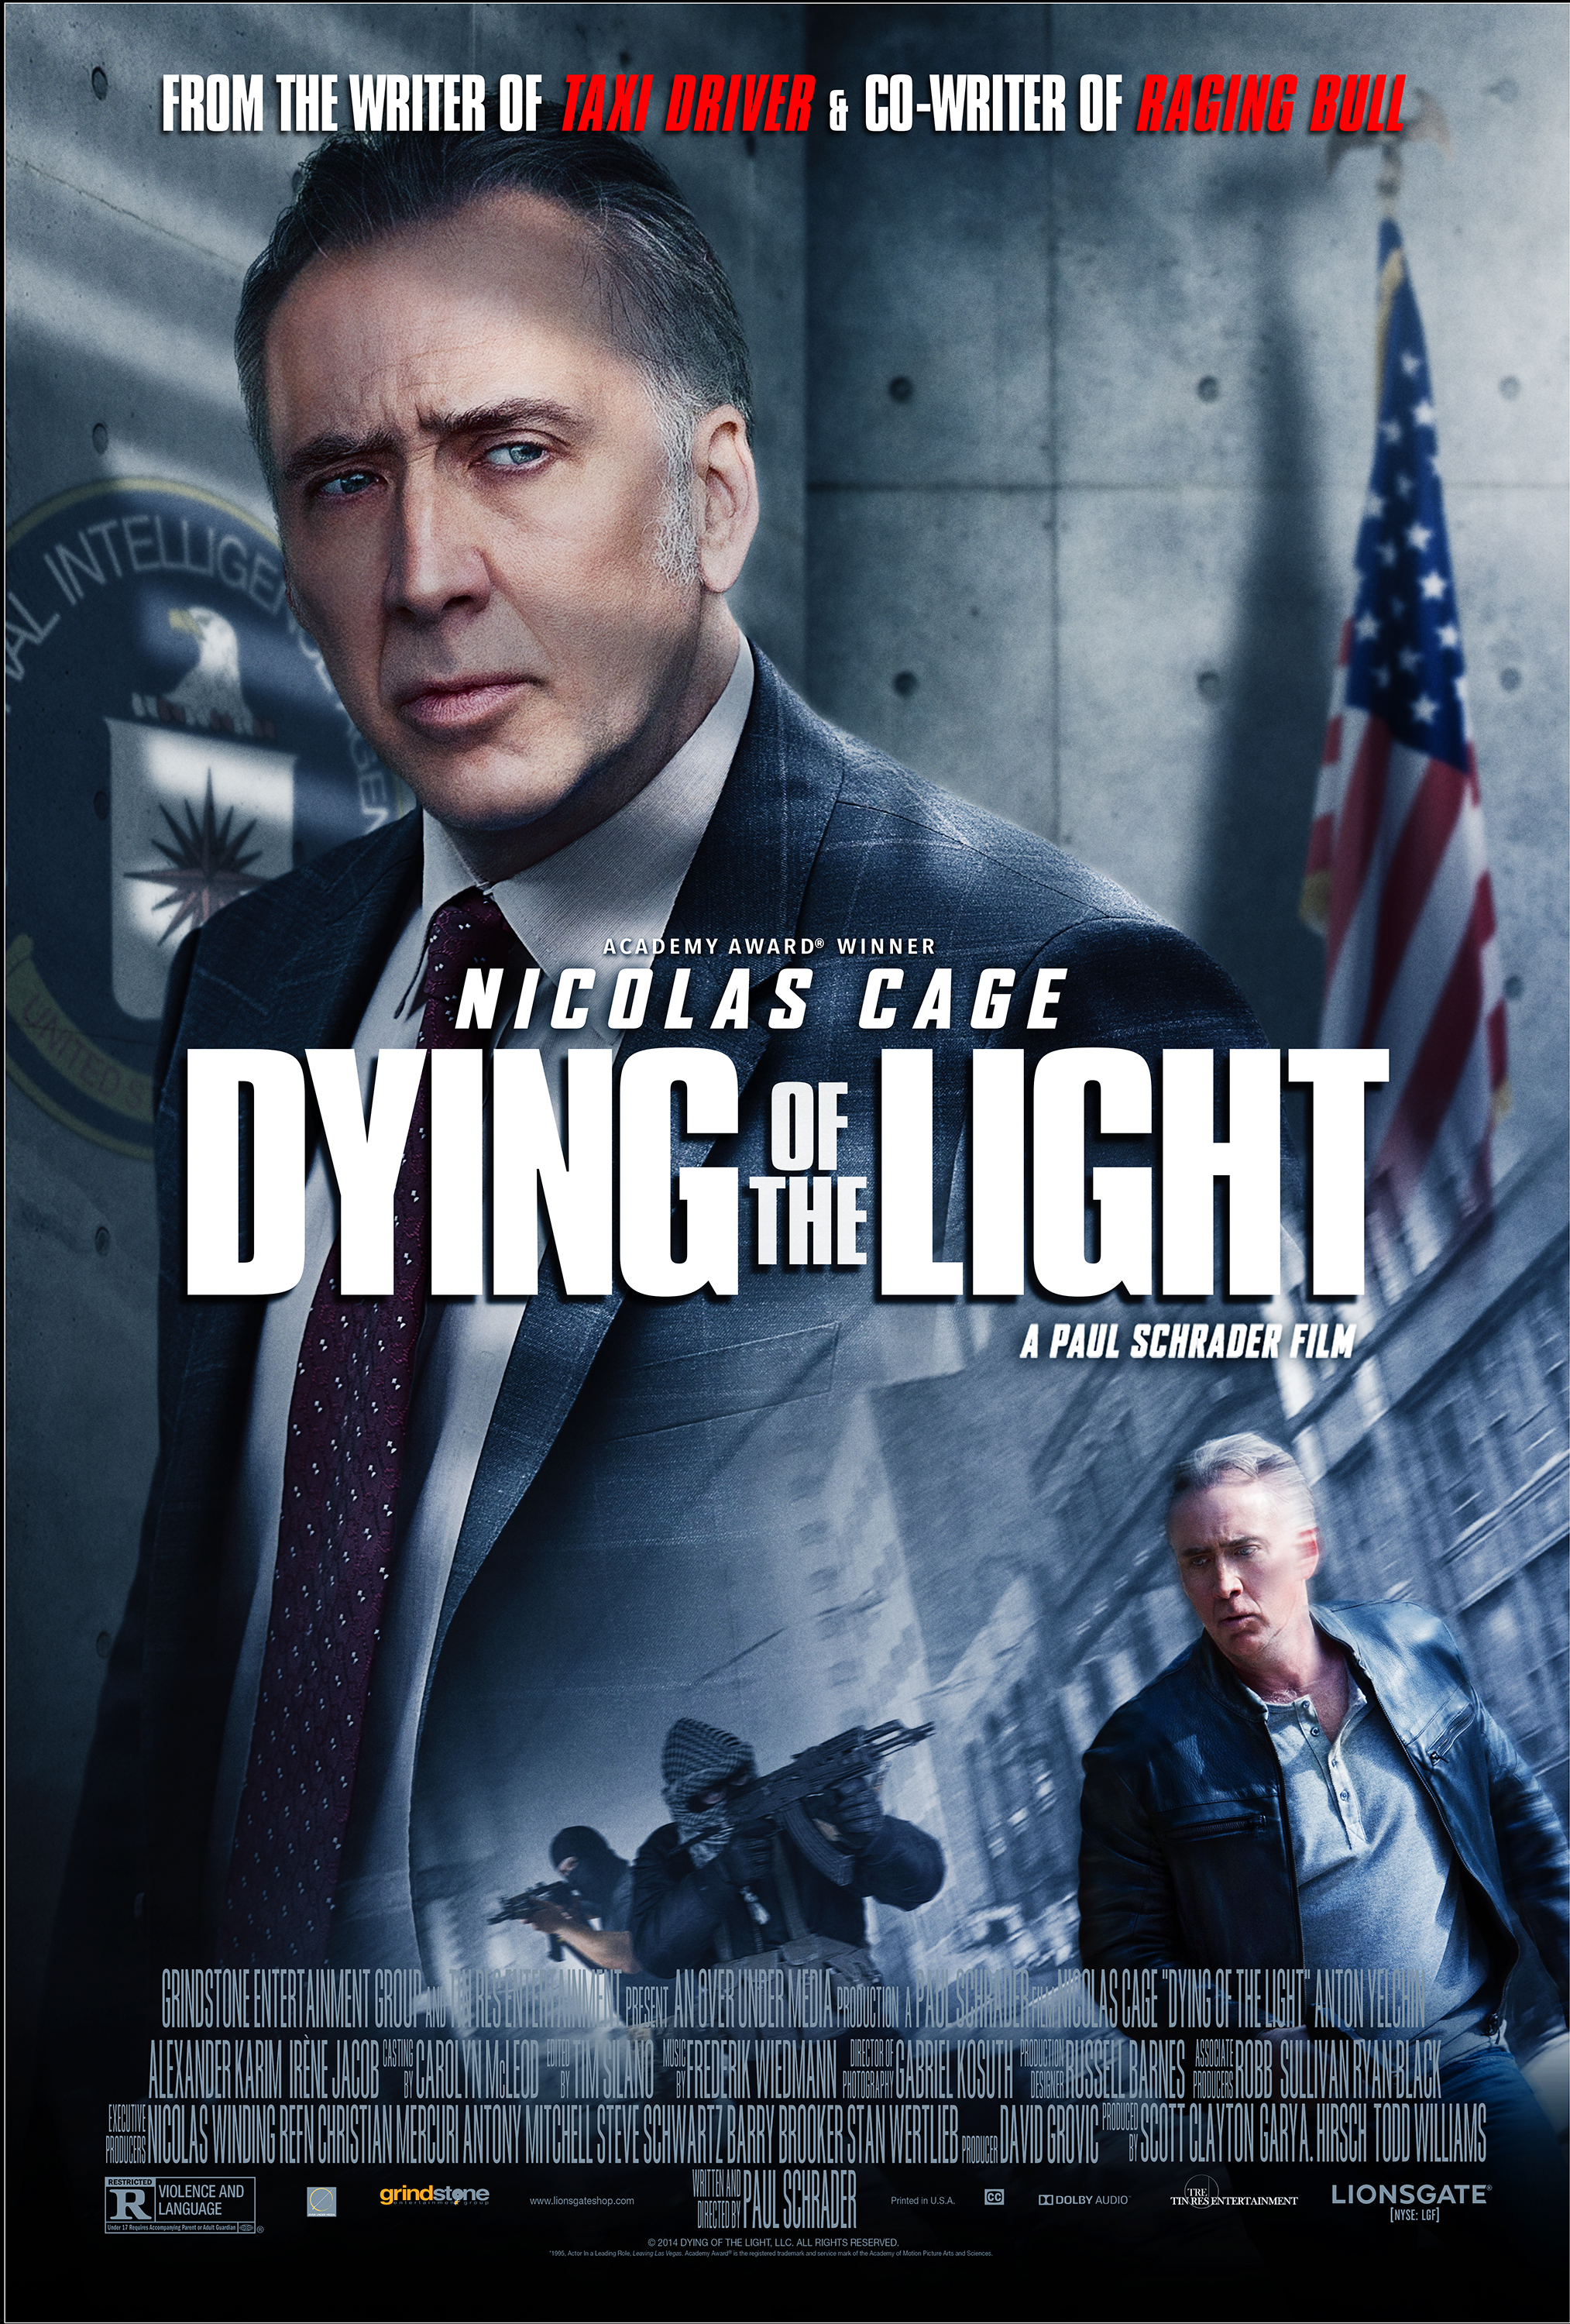 Nicolas Cage in Dying of the Light (2014)